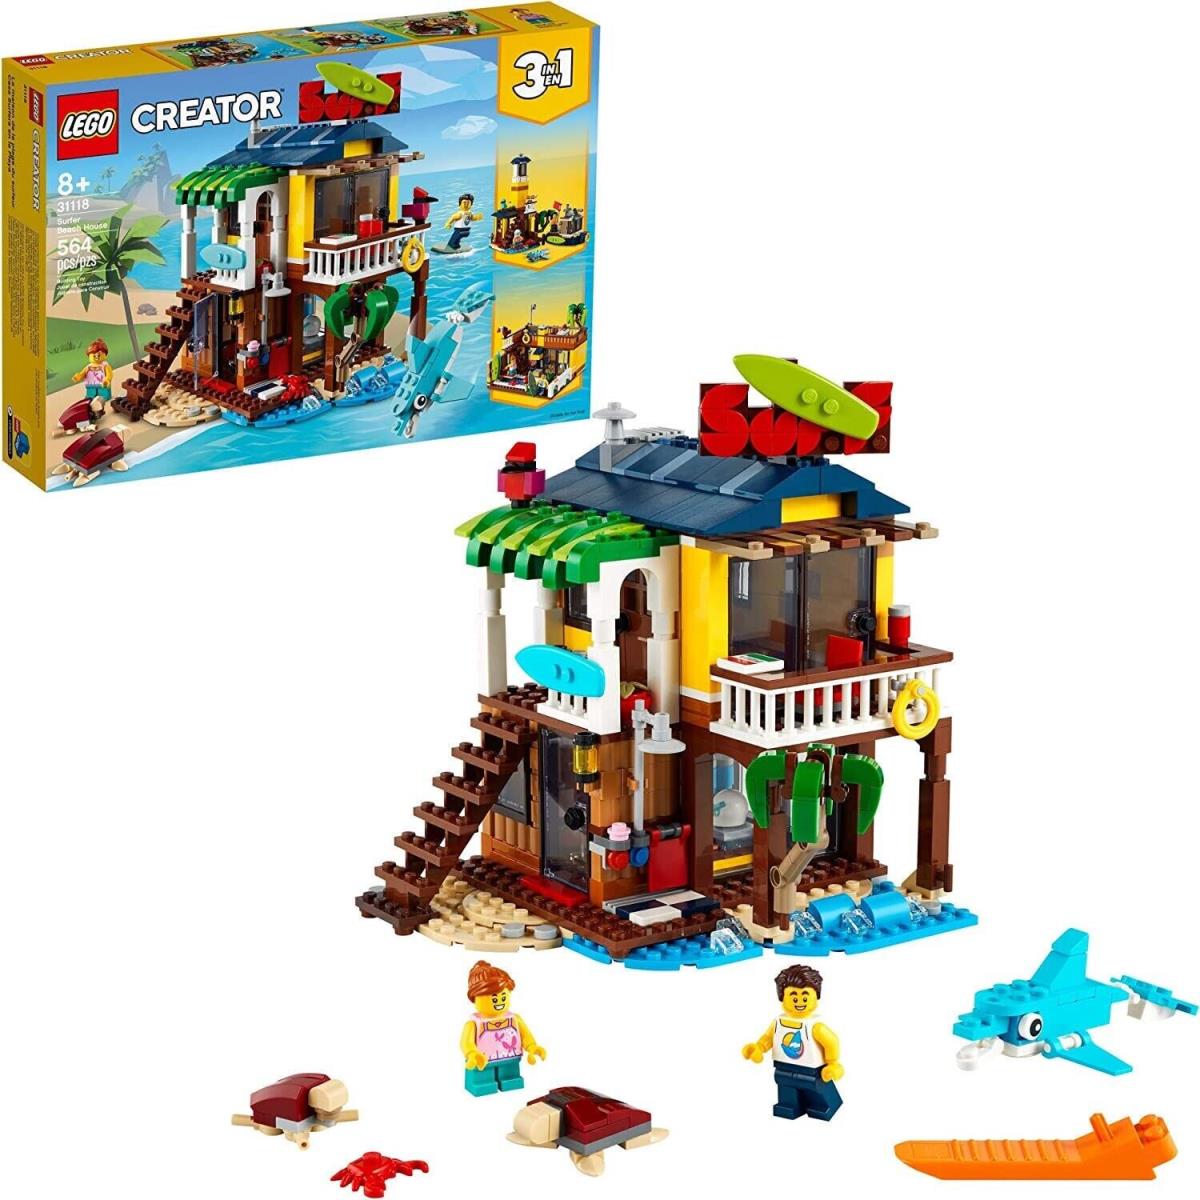 Lego Creator 3in1 Surfer Beach House 31118 Building Toy Set 564 Pieces